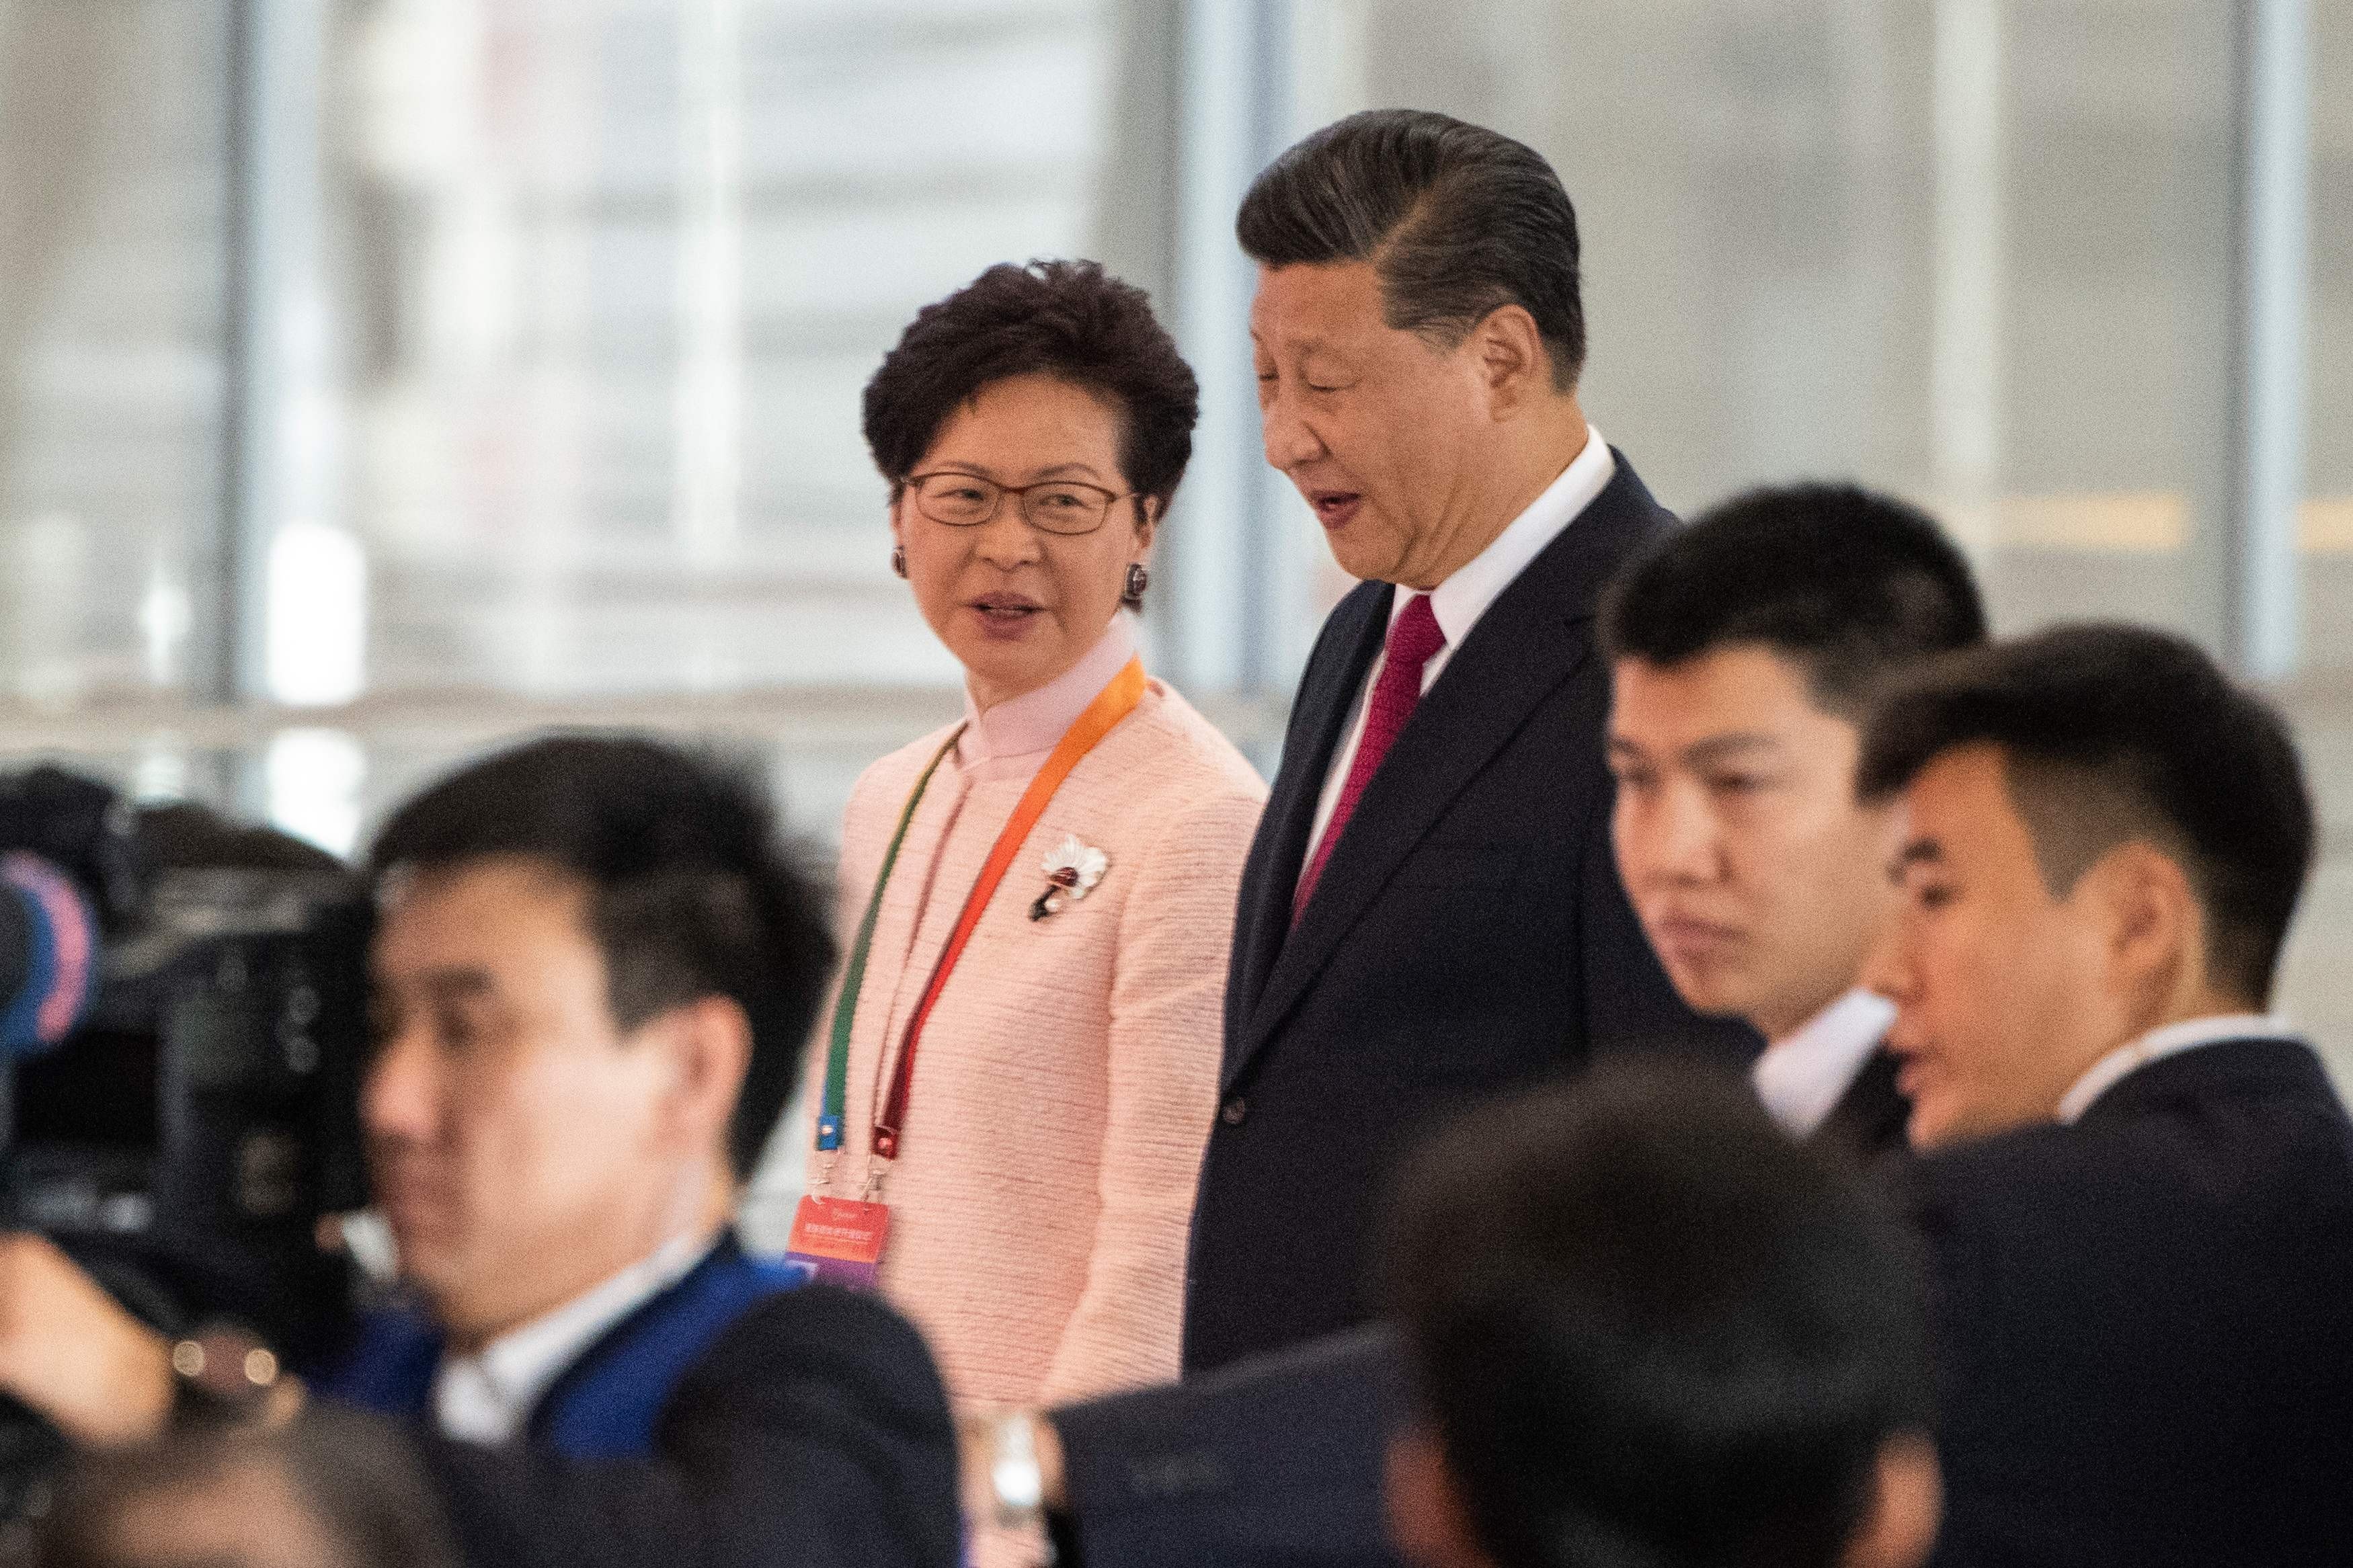 Hong Kong's Chief Executive Carrie Lam and China's President Xi Jinping arrive at the opening ceremony of the Hong Kong-Zhuhai-Macau Bridge at Zhuhai port on October 23. Photo: AFP